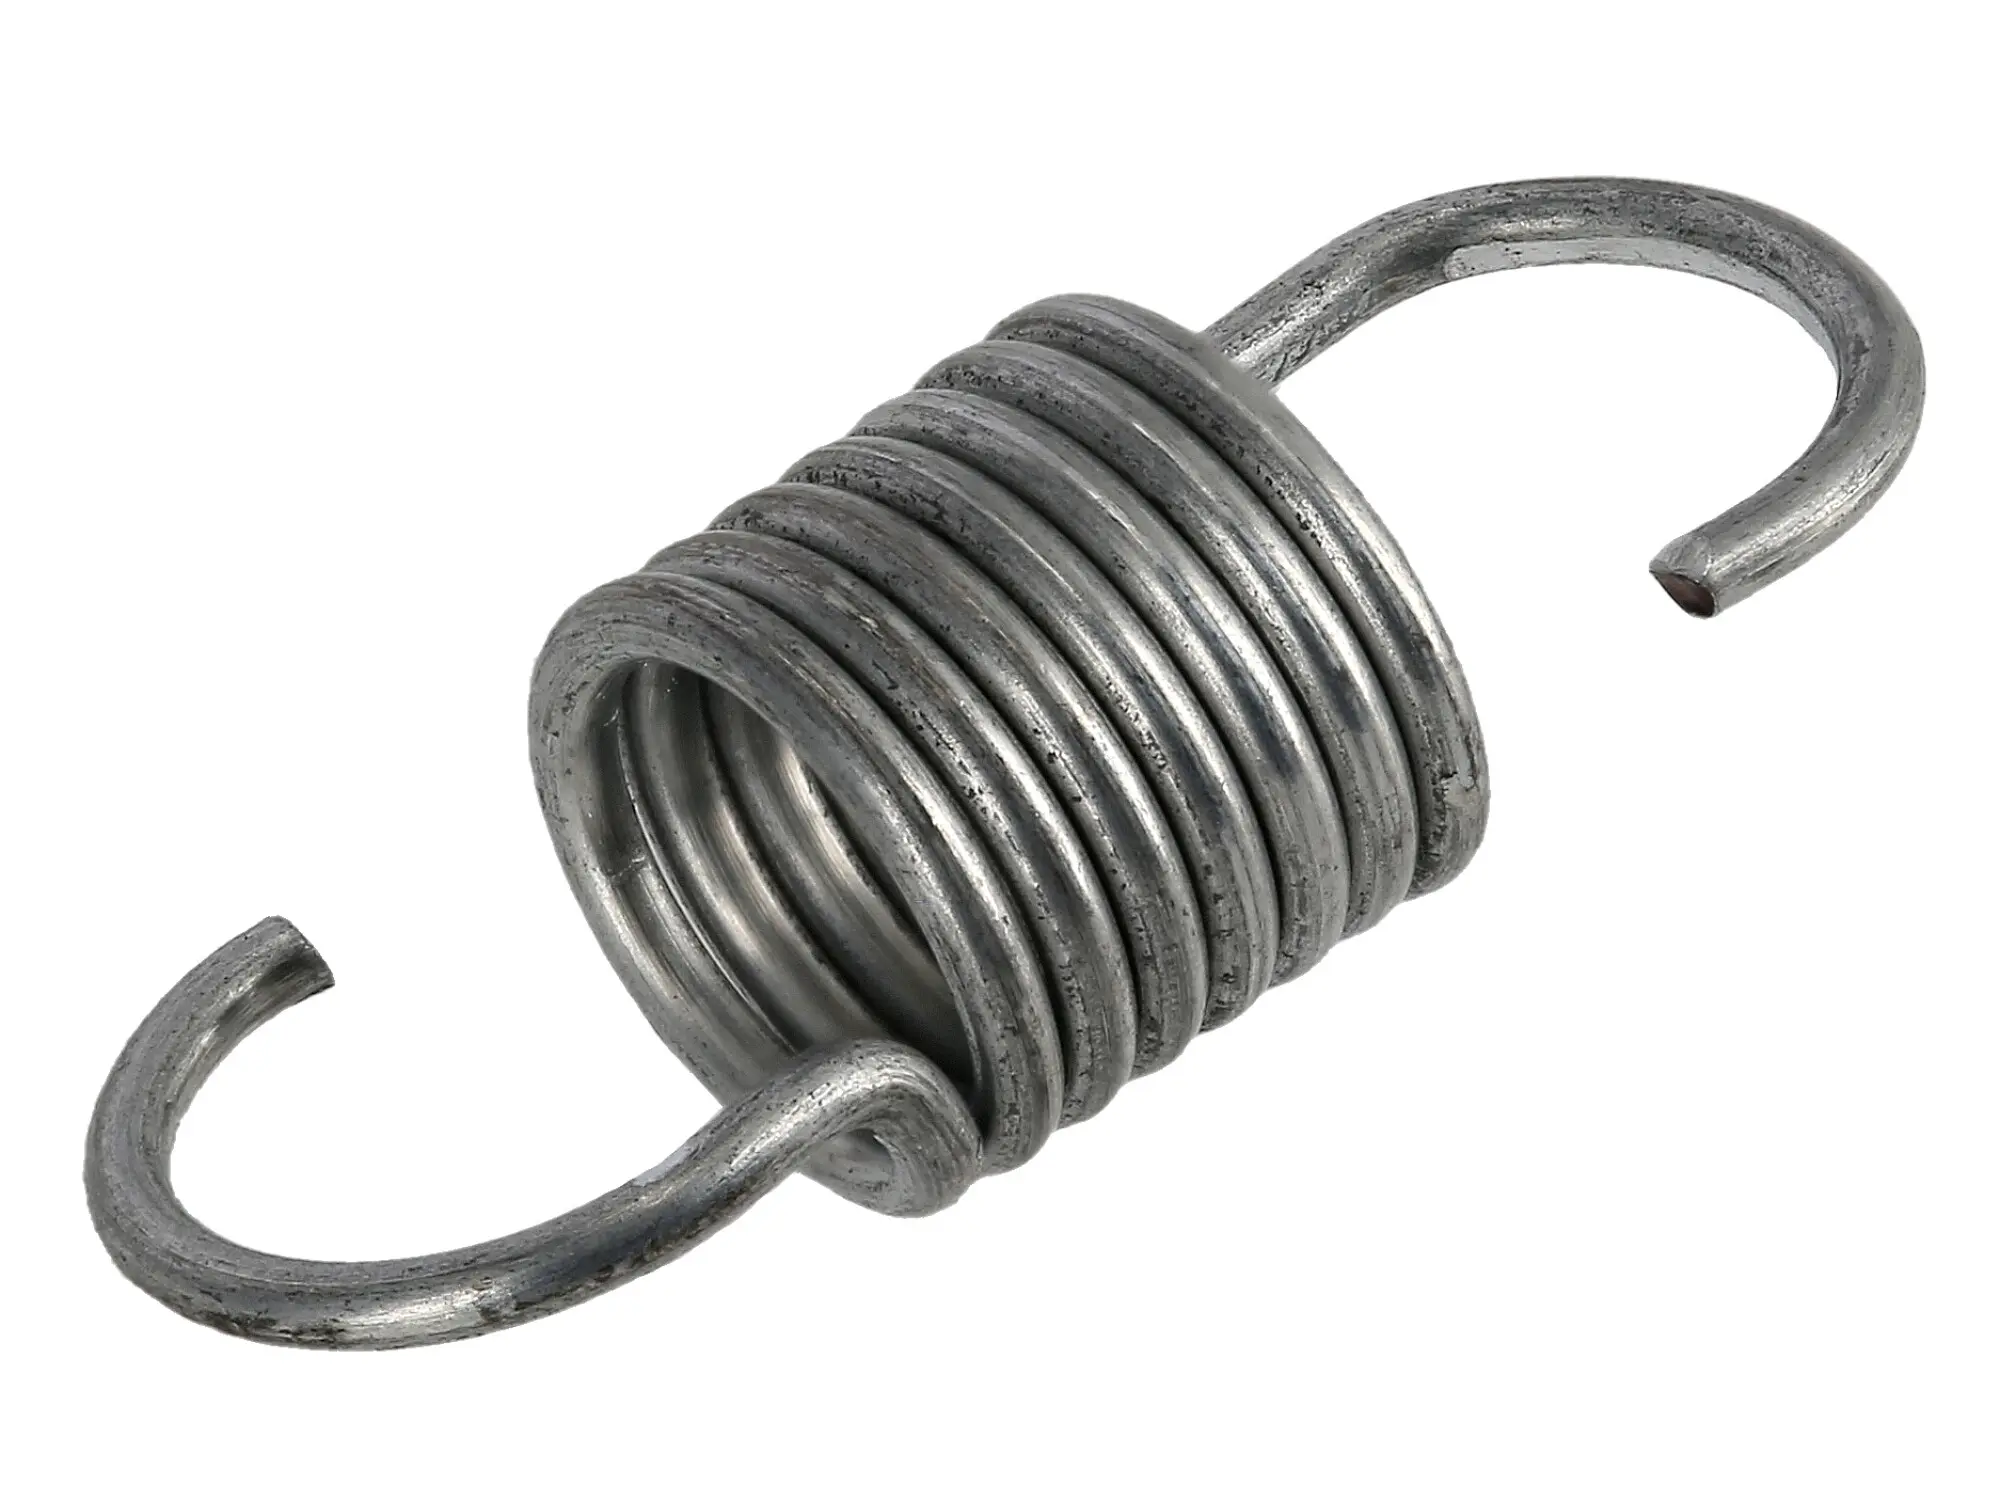 Spring galvanized, for headlight Simson Schwalbe KR51 and for detent lever of the circuit M541 engine, Item no: 10071034 - Image 1